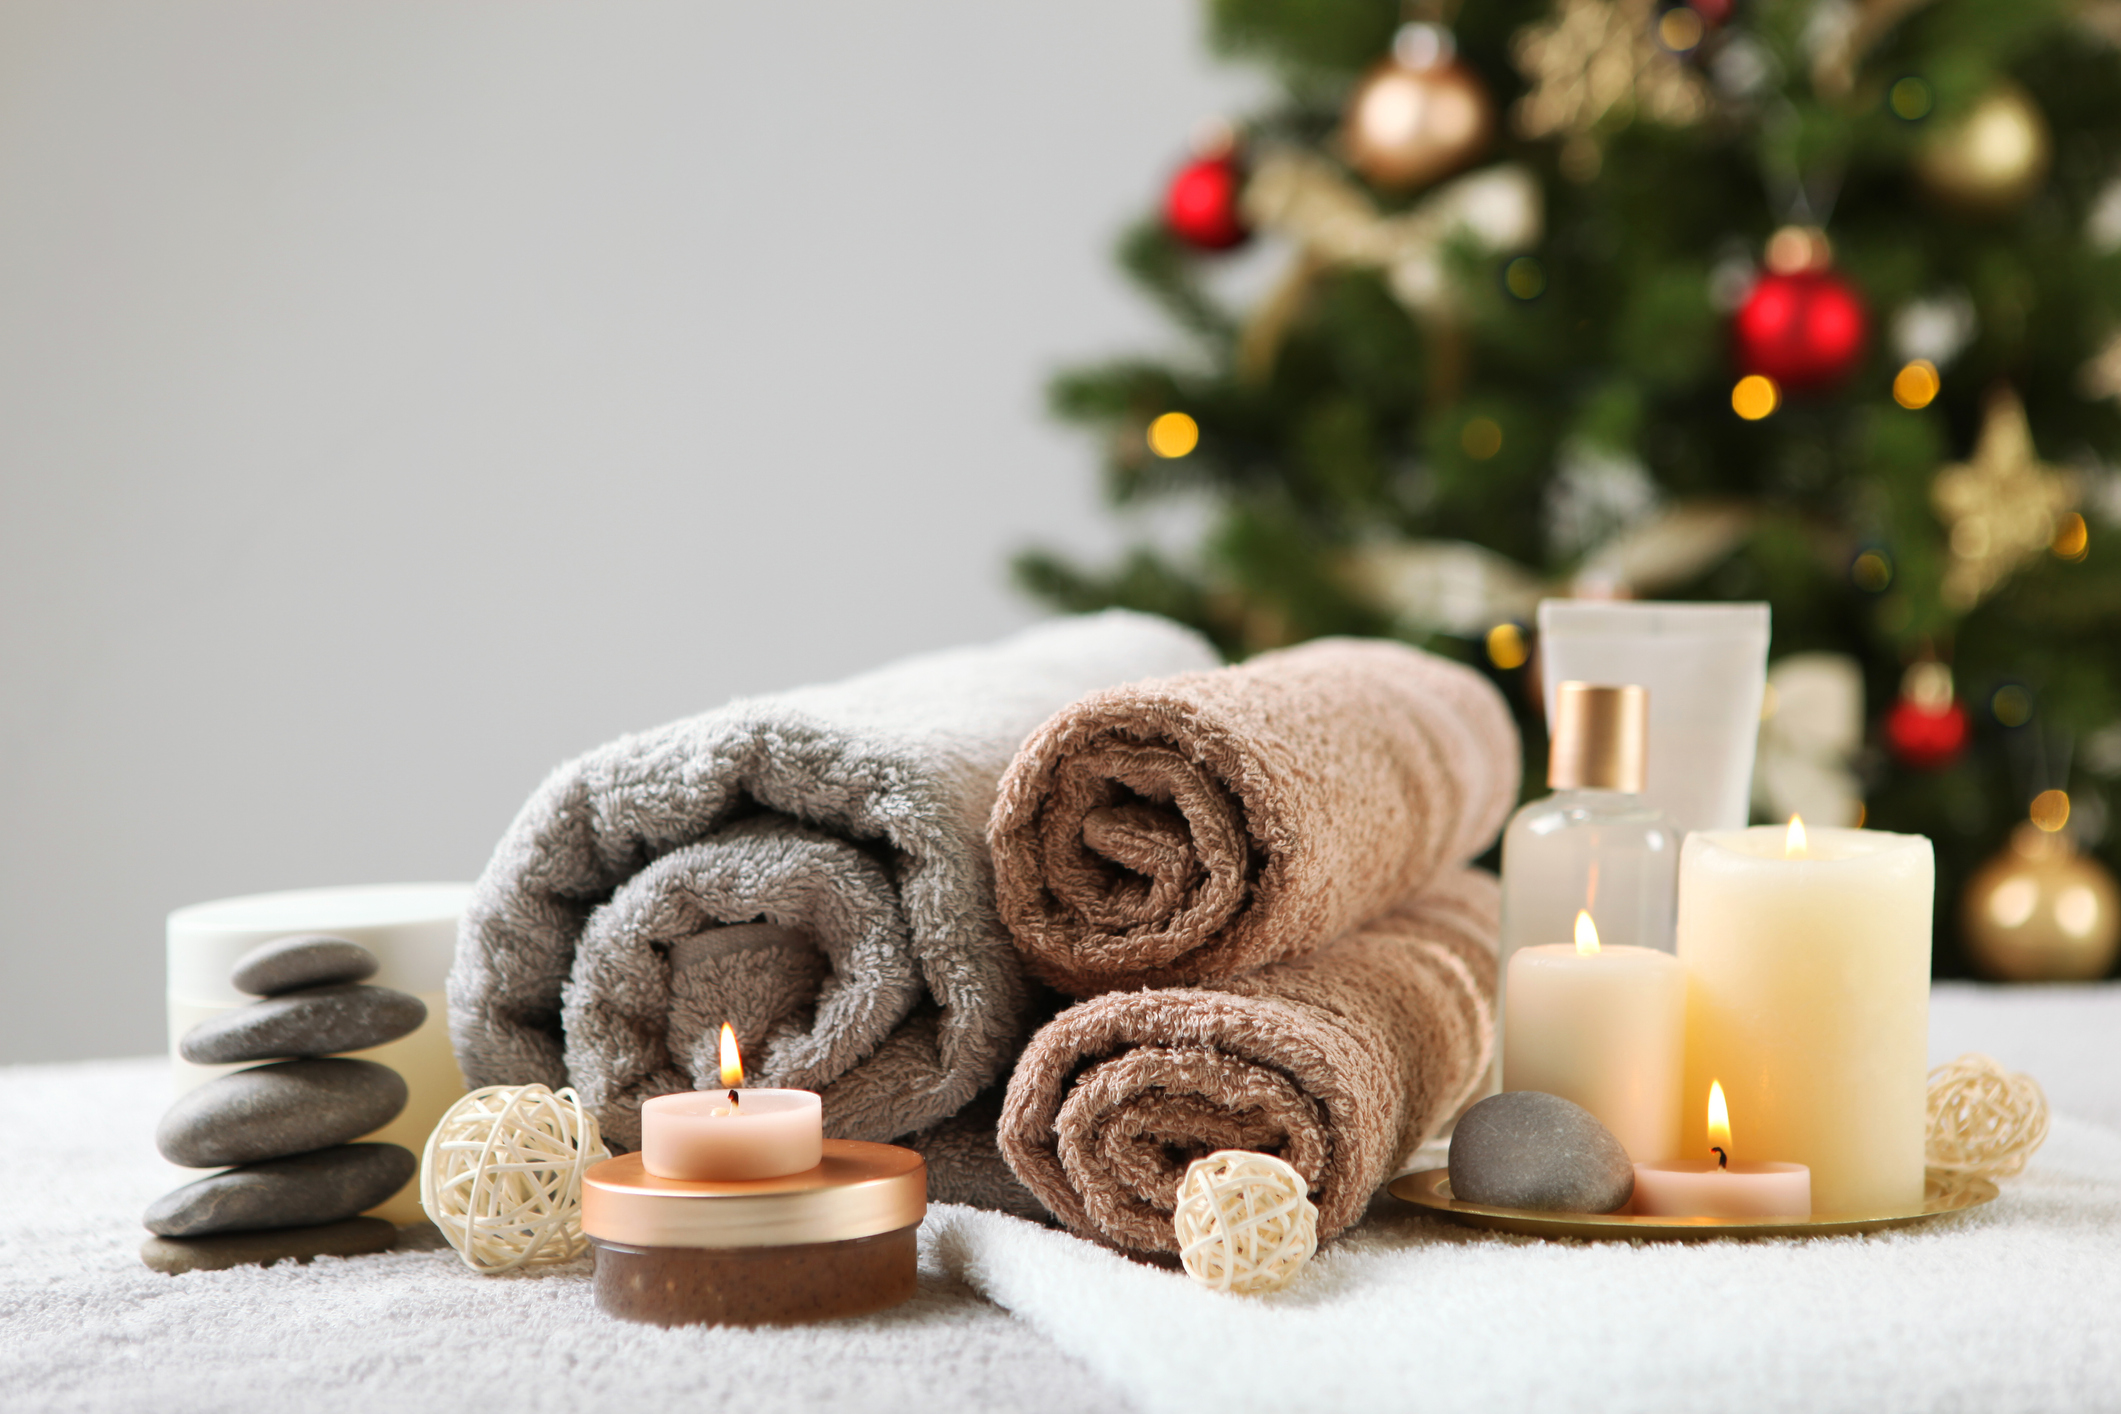 The Salon Owner’s Guide to Black Friday & The Holidays